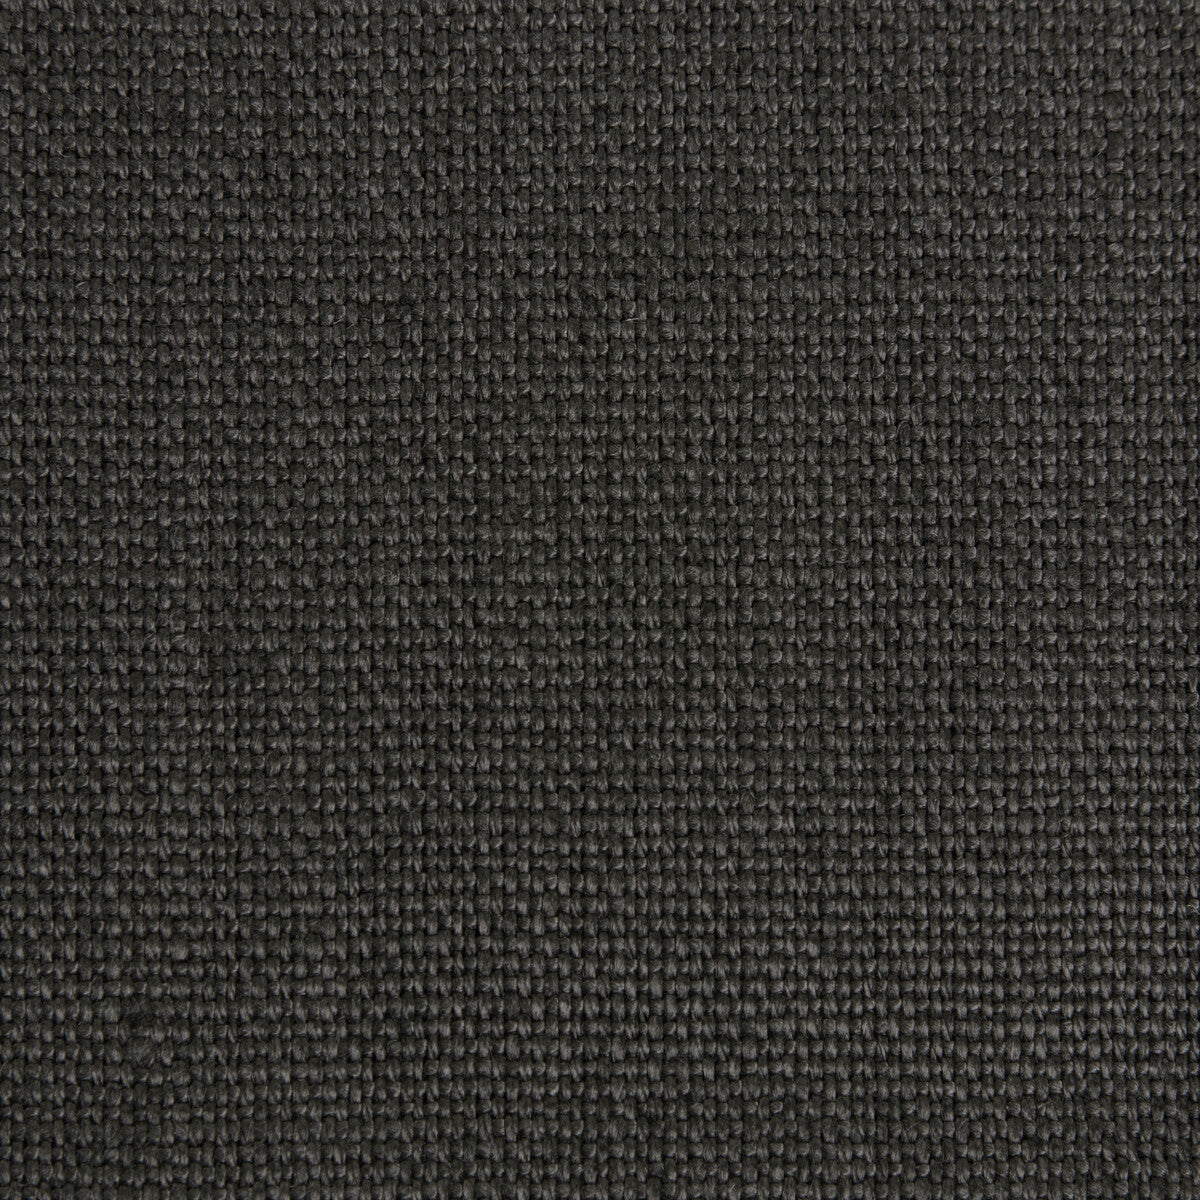 Hampton Linen fabric in charcoal color - pattern 2012171.21.0 - by Lee Jofa in the Colour Complements II collection